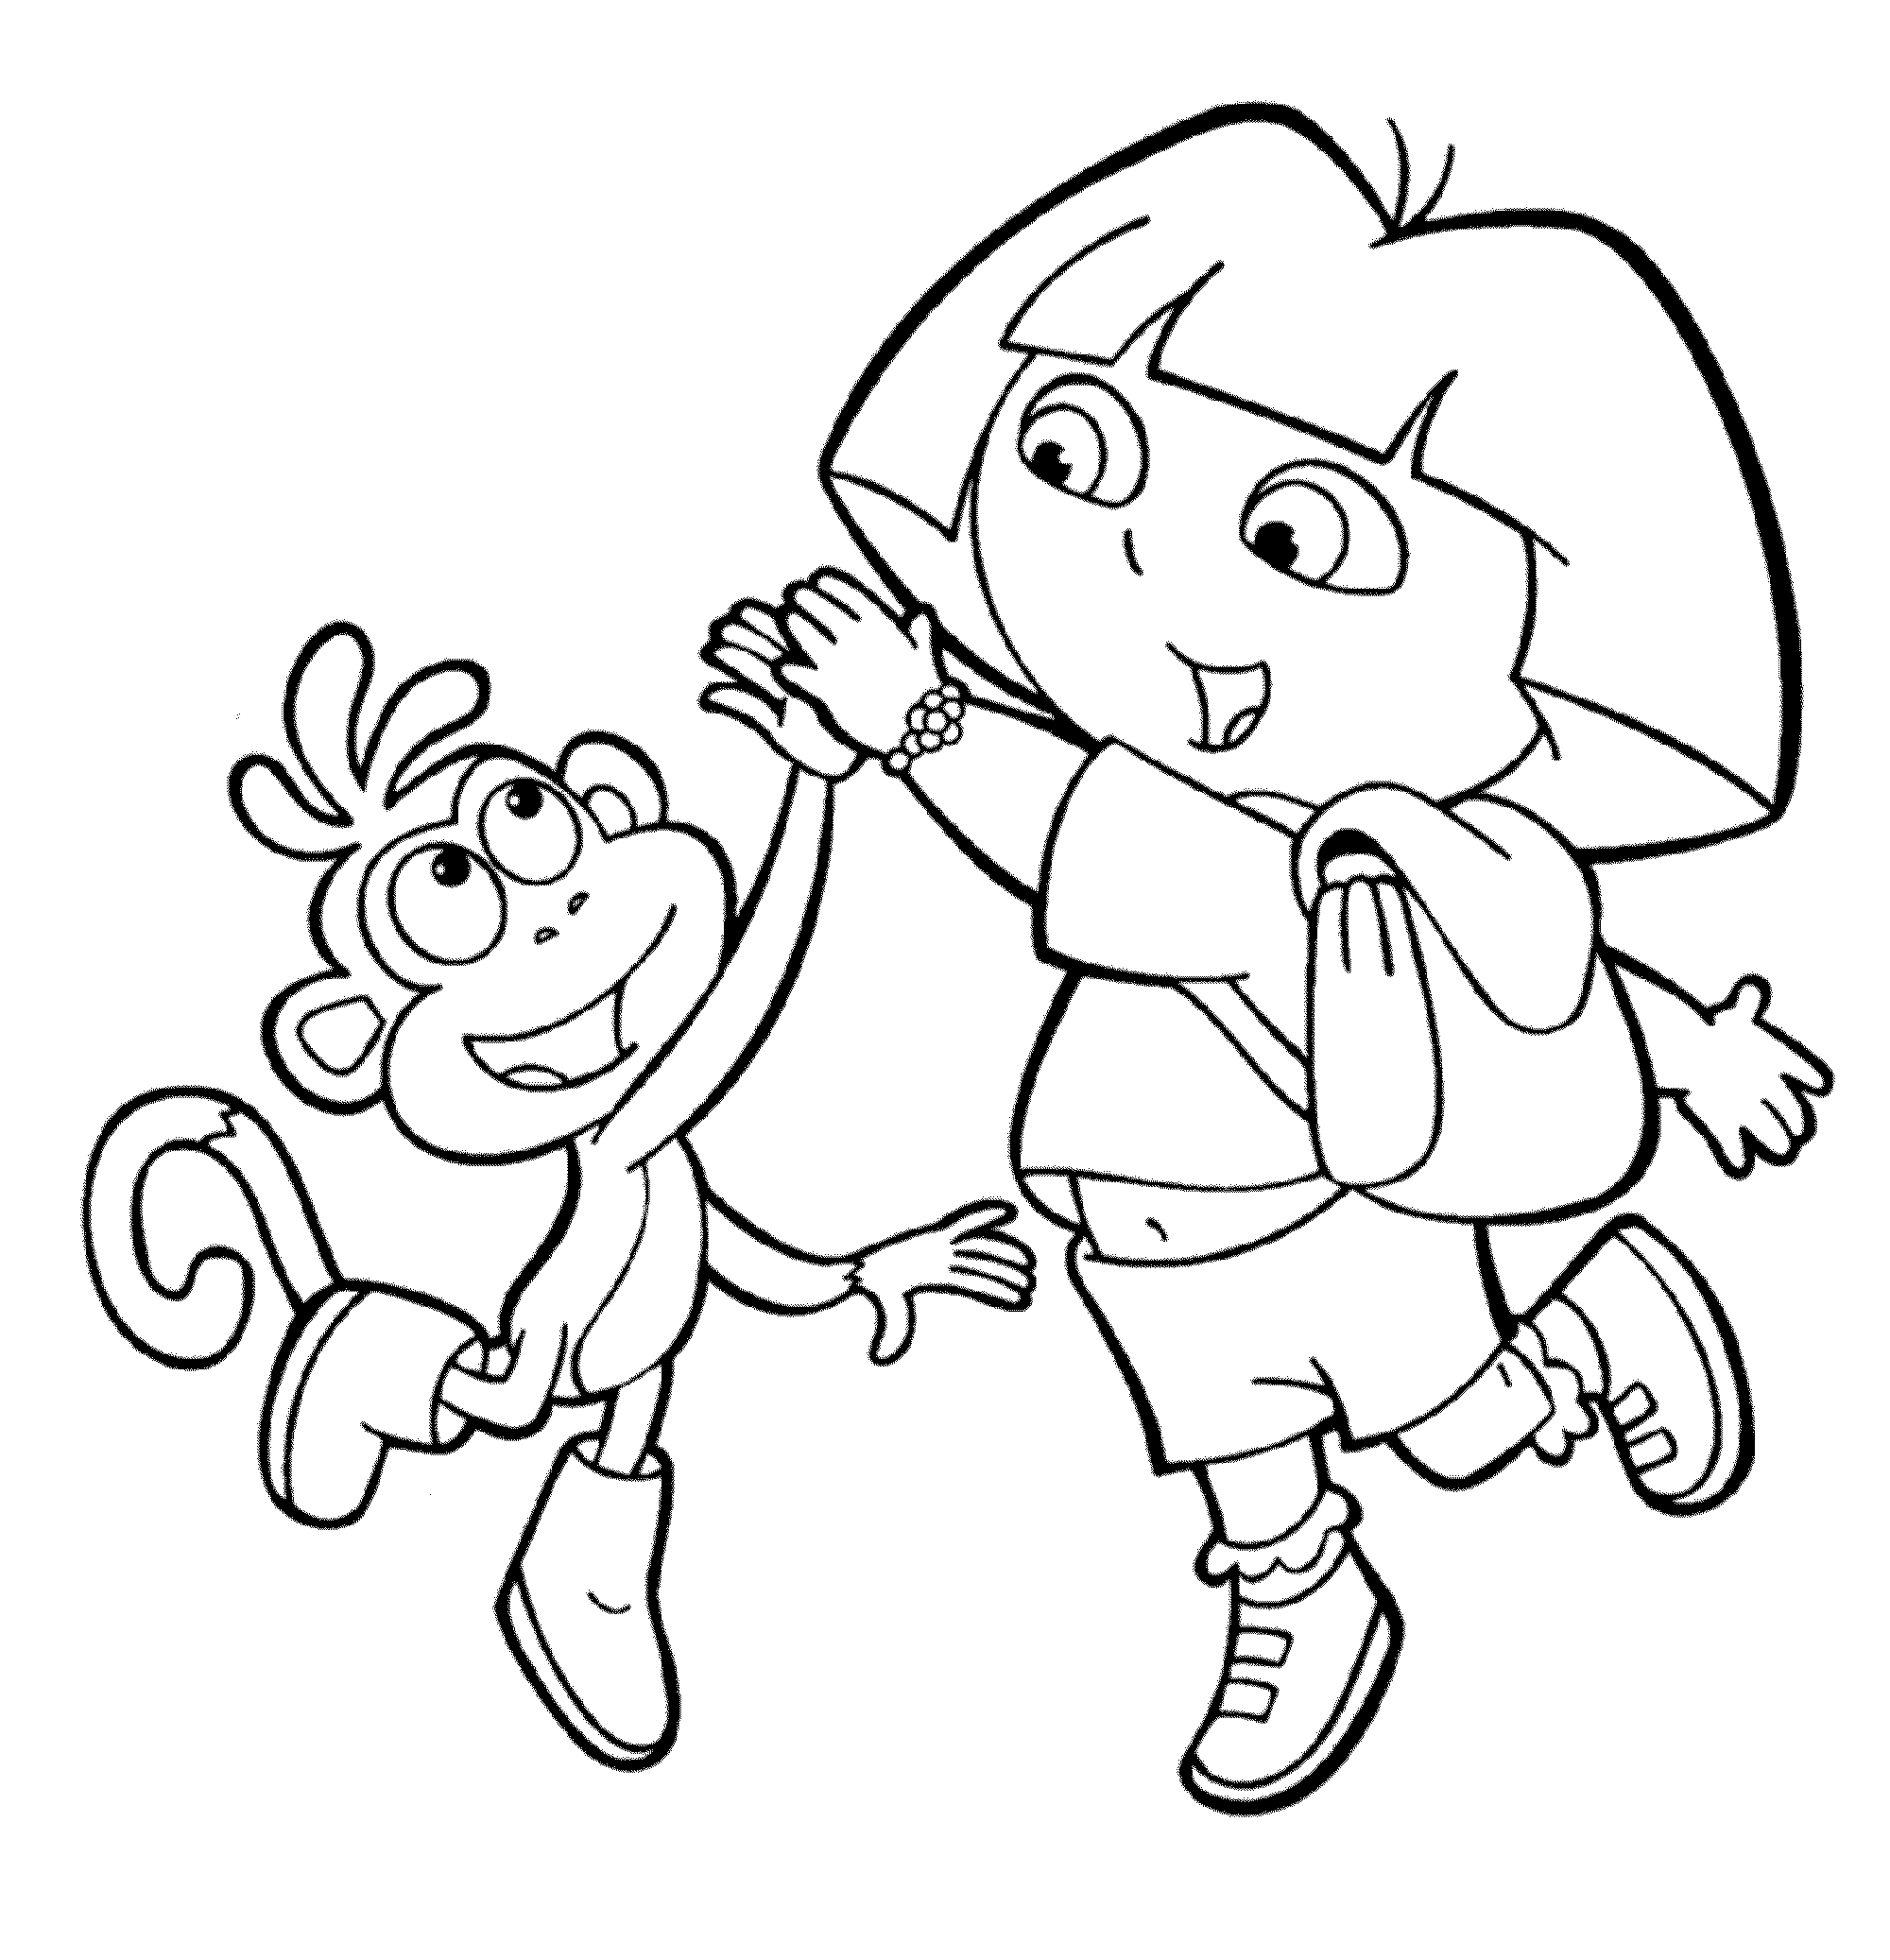 Print & Download - Dora Coloring Pages to Learn New Things